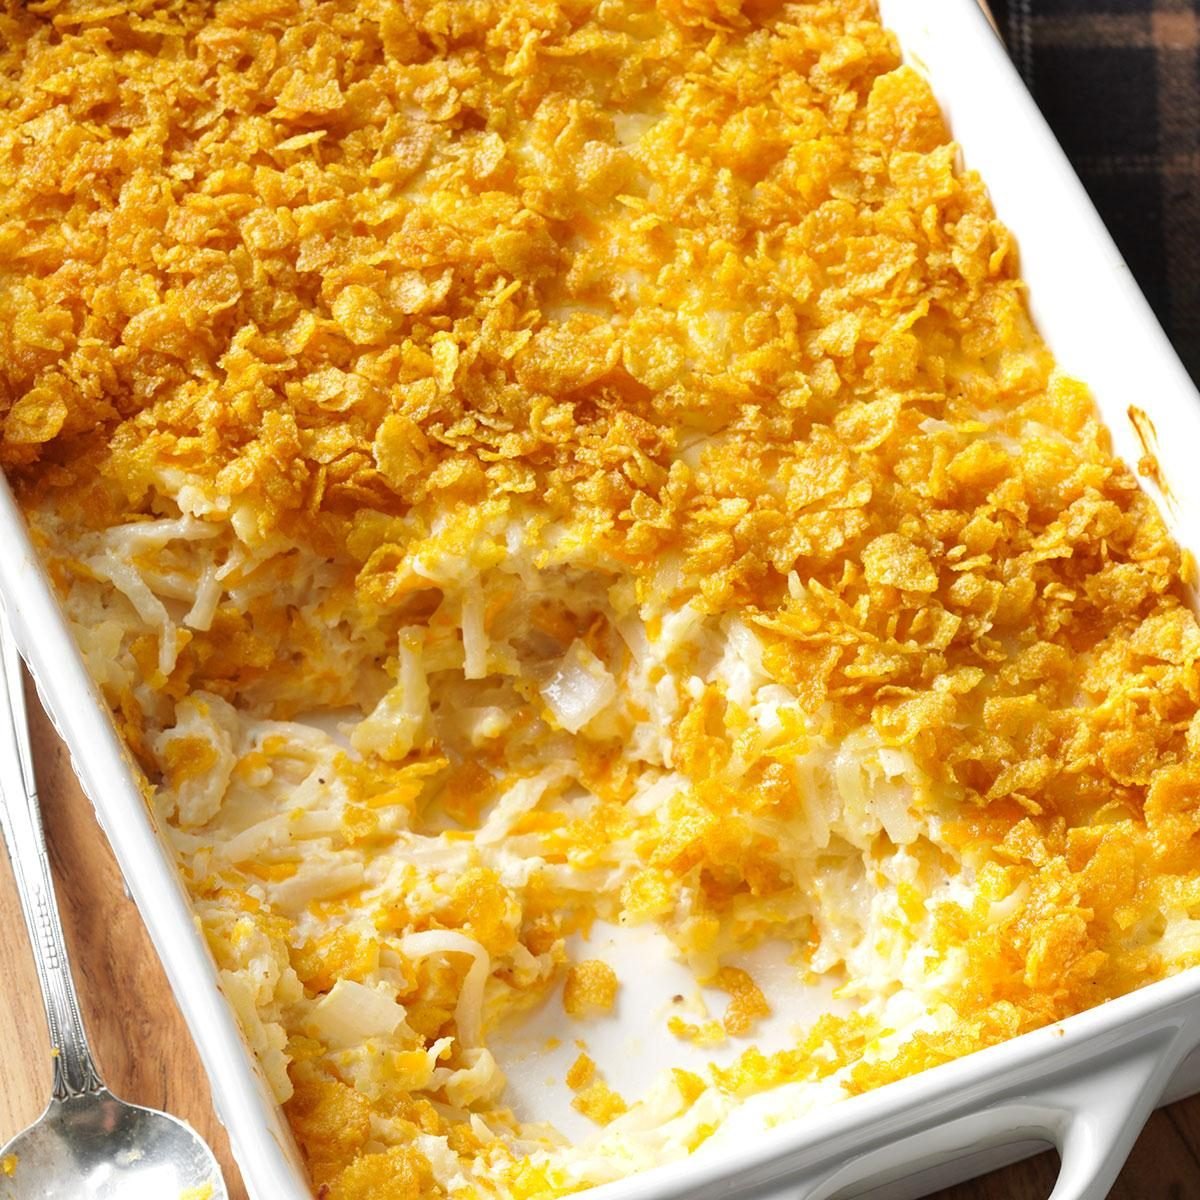 40 Comforting Funeral Foods For Those in Need